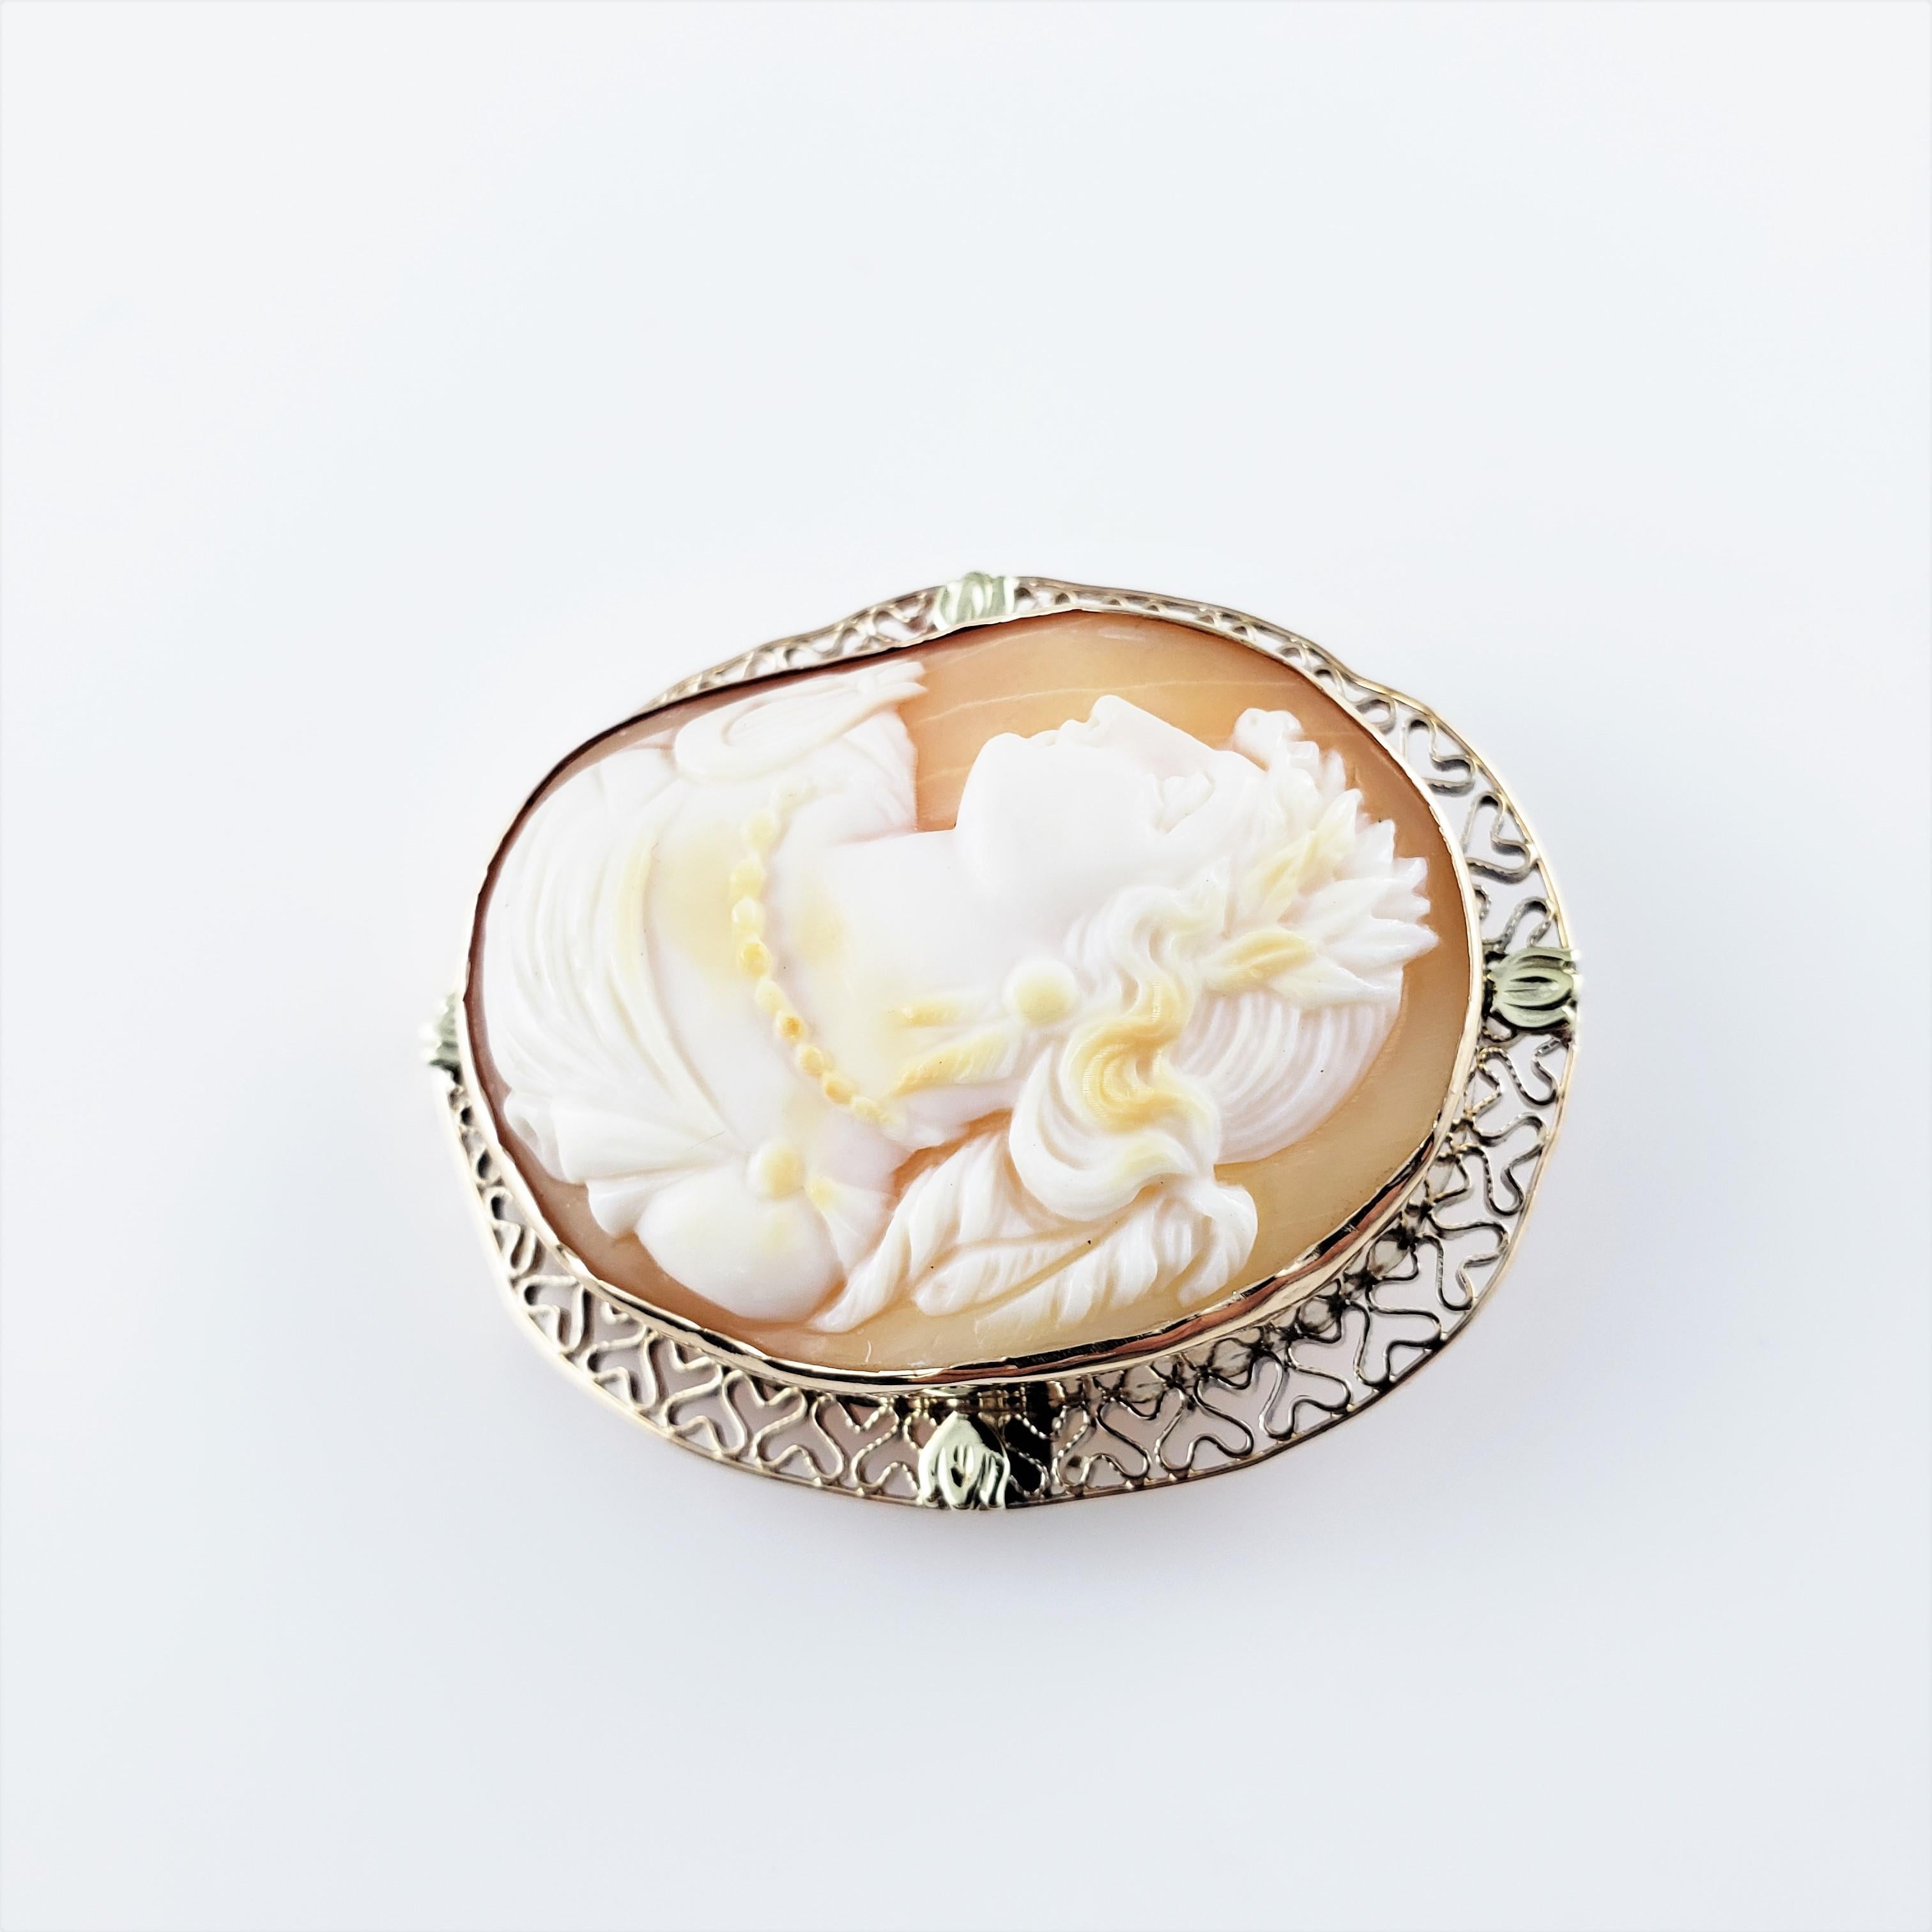 14 Karat Rose Gold Cameo Brooch Pendant-

This elegant cameo features a lovely lady in profile framed in beautifully detailed 14K rose gold.

*Chain not included

Size:  40 mm x  33 mm

Weight:  6.7 dwt. /  10.5 gr.

Stamped:  14K

Very good